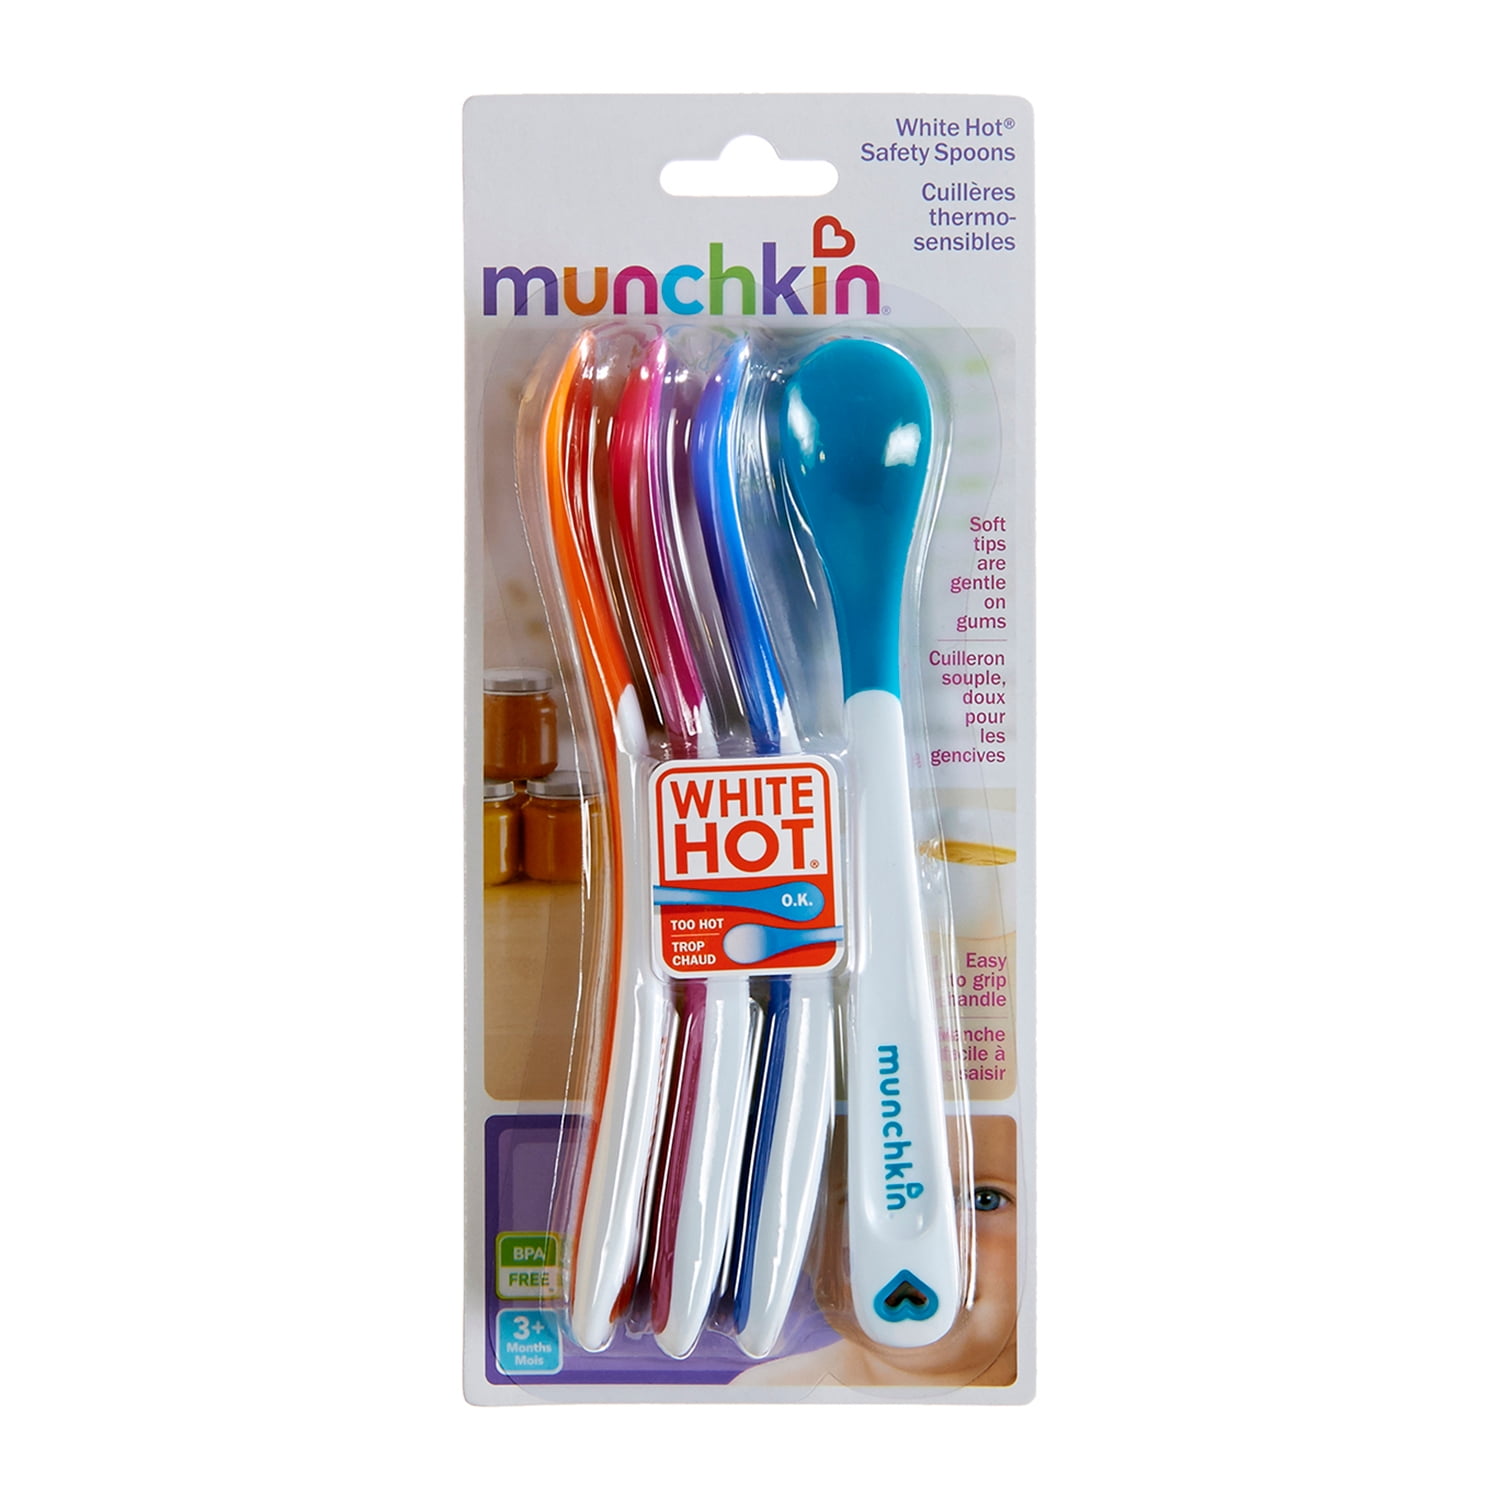 Munchkin 12 Pack White Hot Safety Spoon